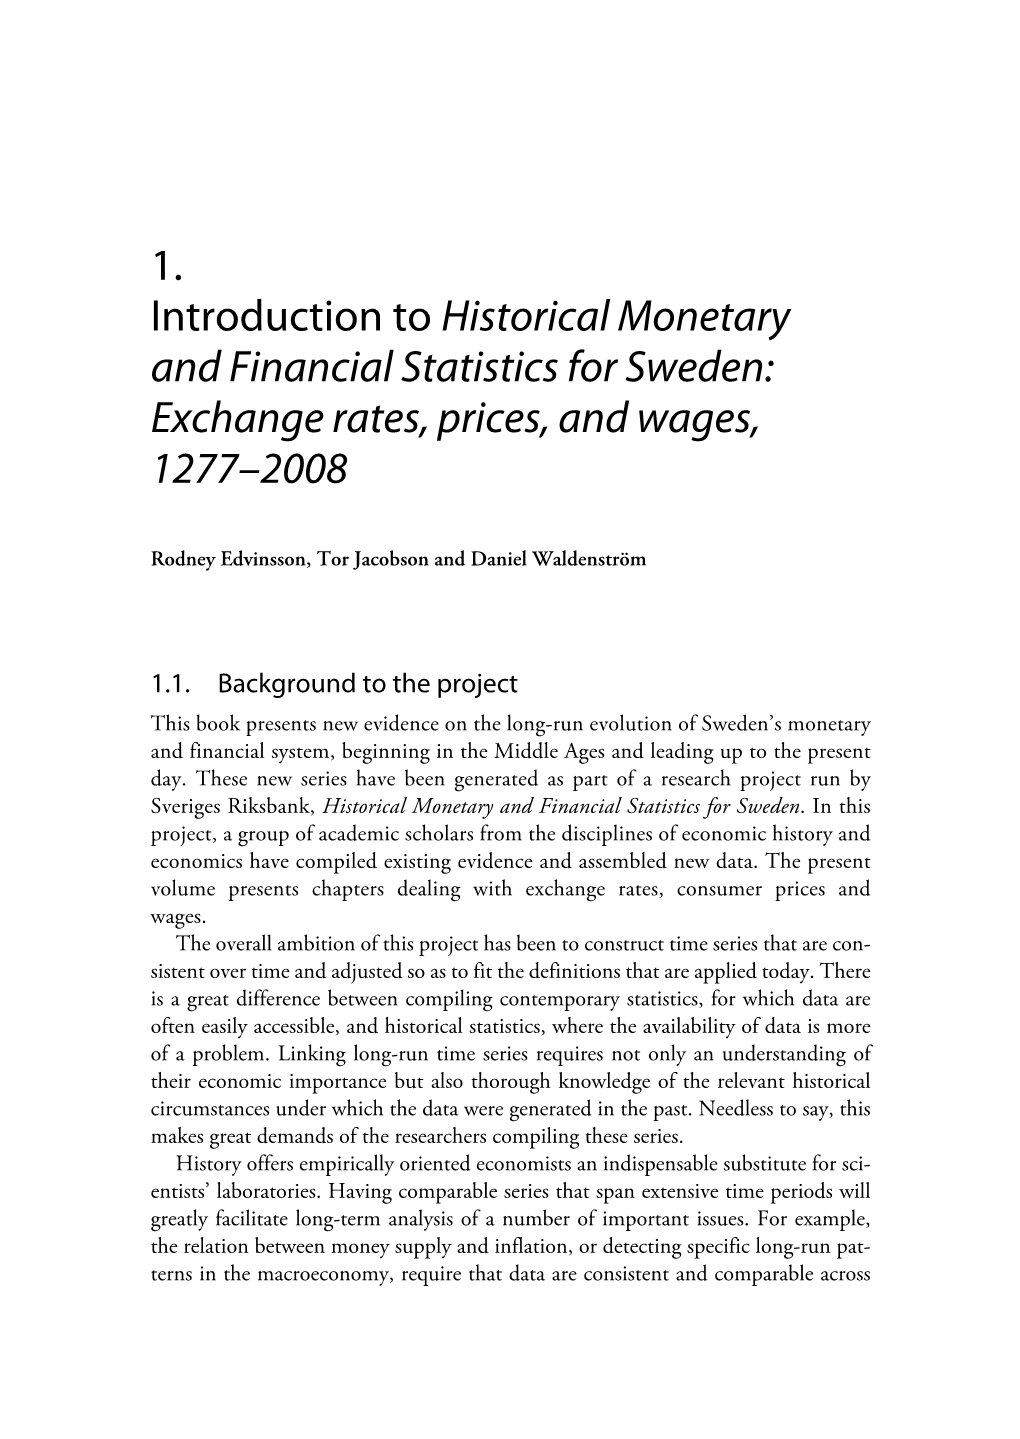 1. Introduction to Historical Monetary and Financial Statistics for Sweden: Exchange Rates, Prices, and Wages, 1277–2008